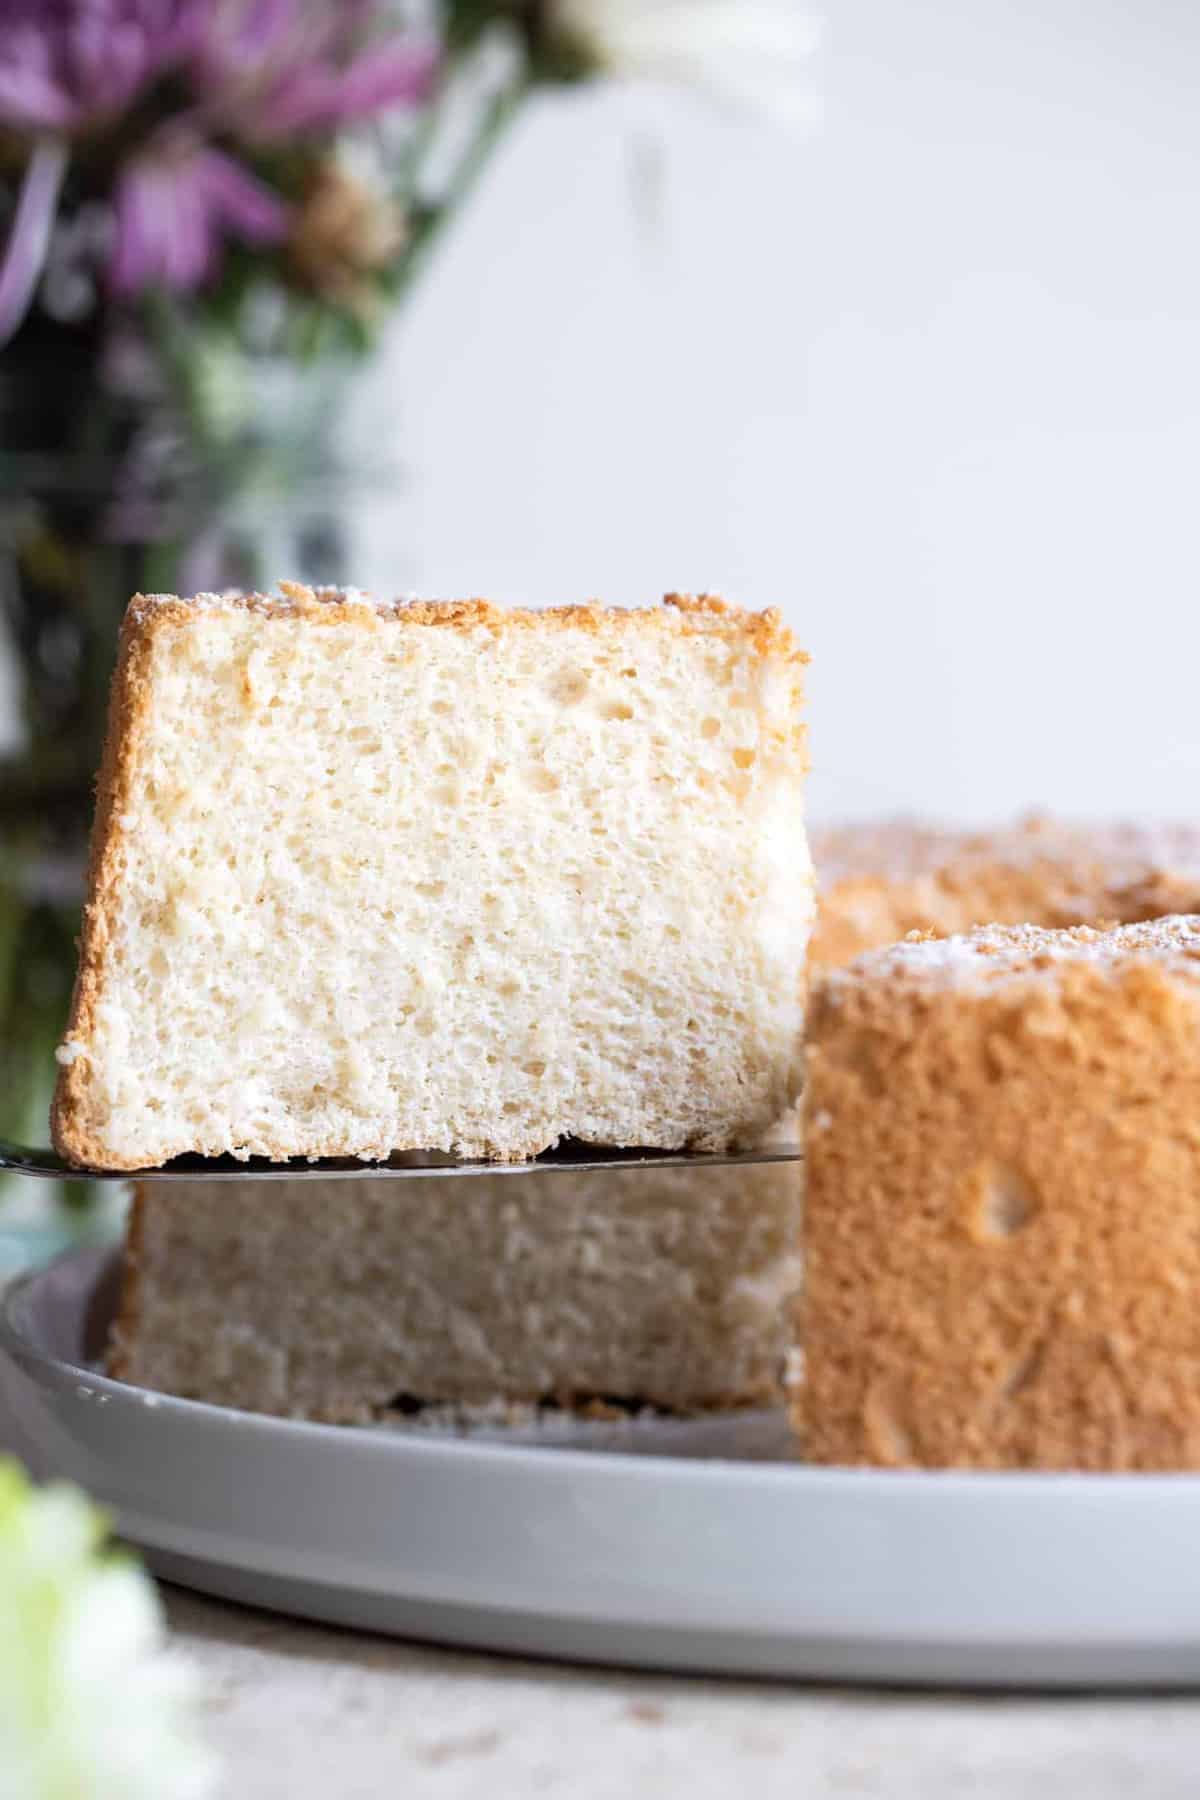 Sugar free angel food cake slice lifting out of a cake